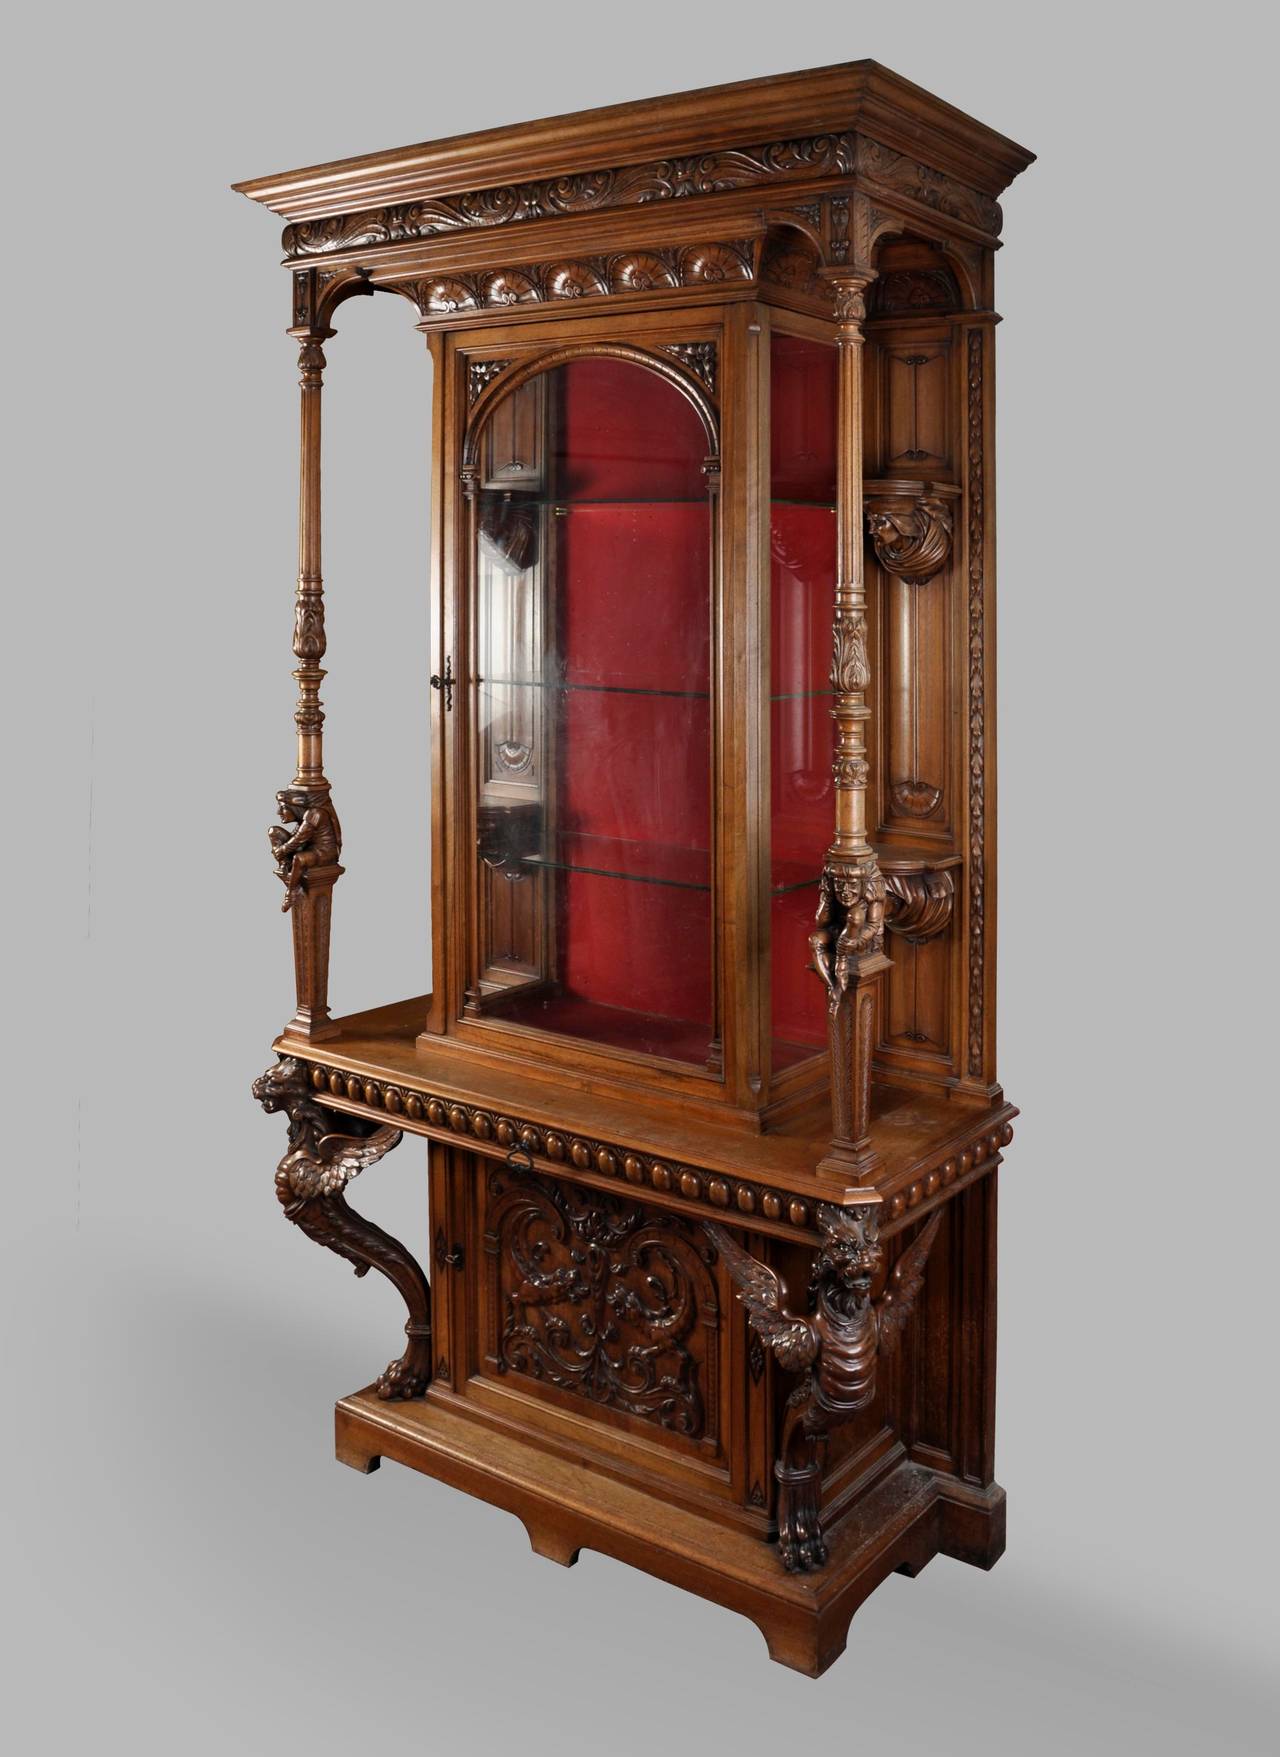 This Neo-Renaissance style cabinet was sculpted in walnut circa 1870. The cabinet is signed by the french cabinetmaker Bellanger : 